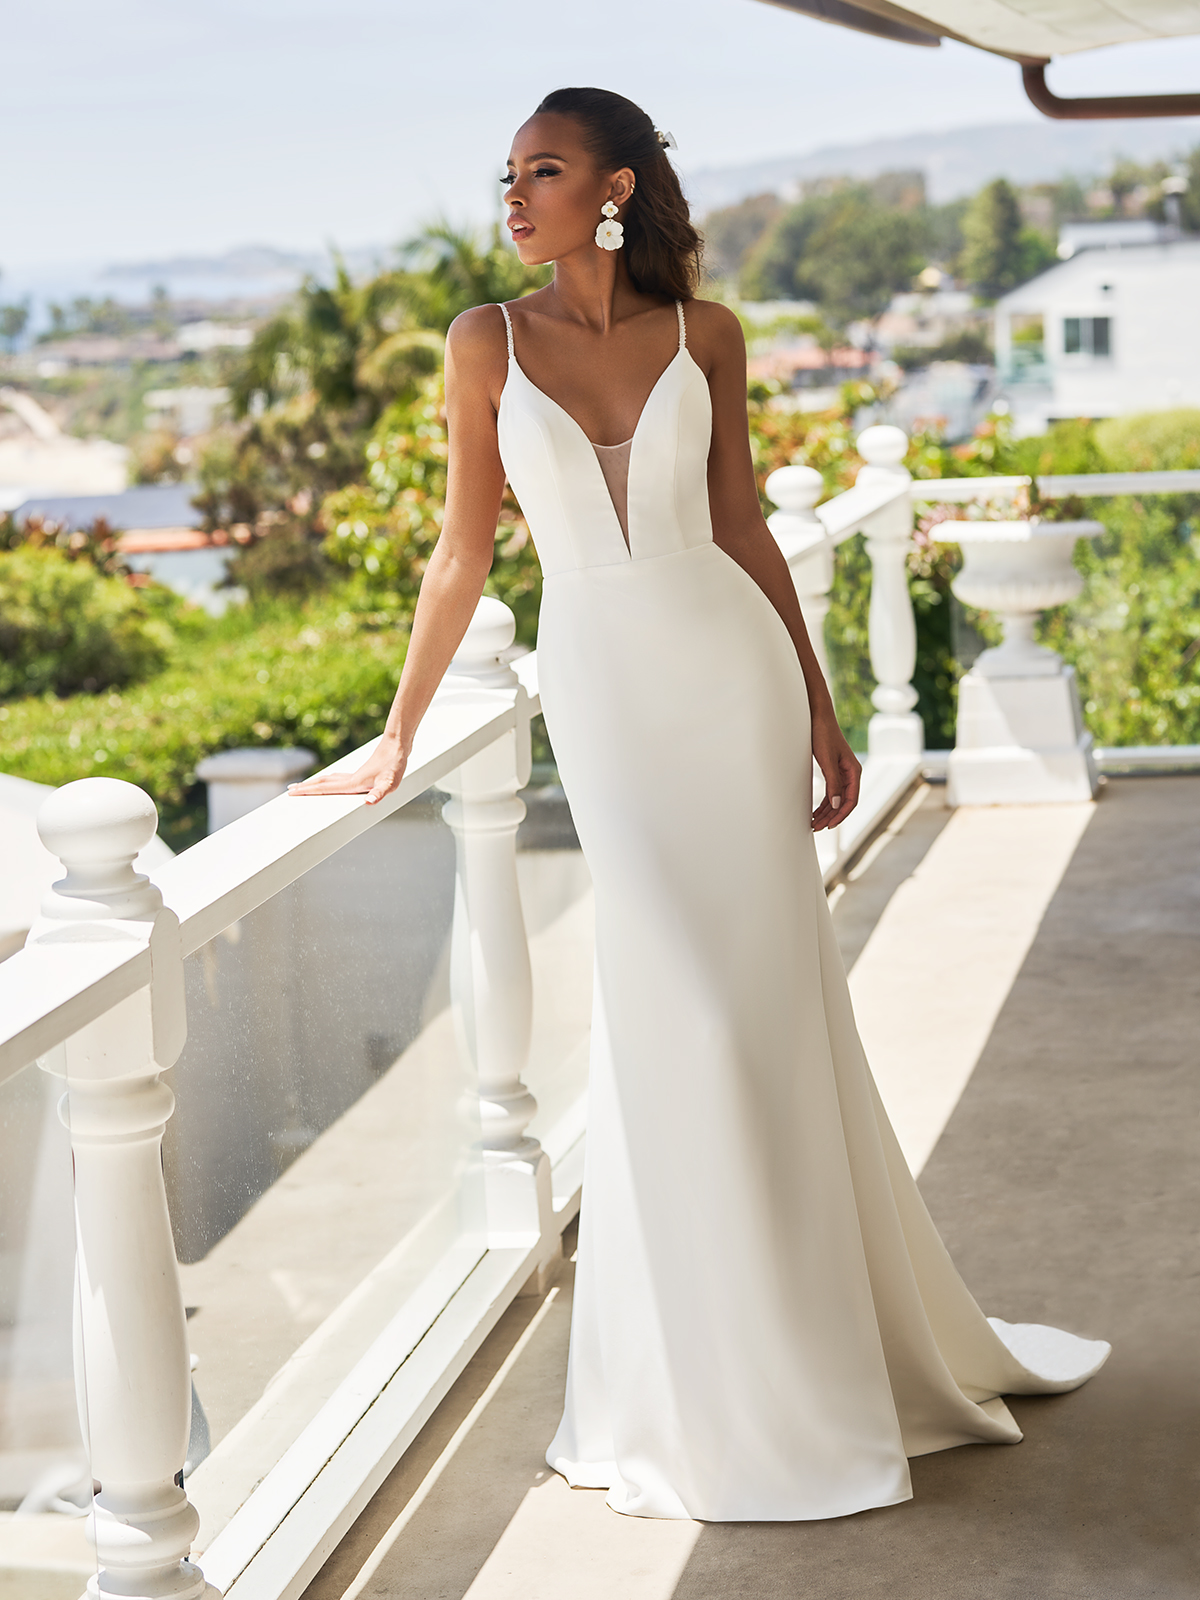 Simple Wedding Dresses That Are Just Plain Chic